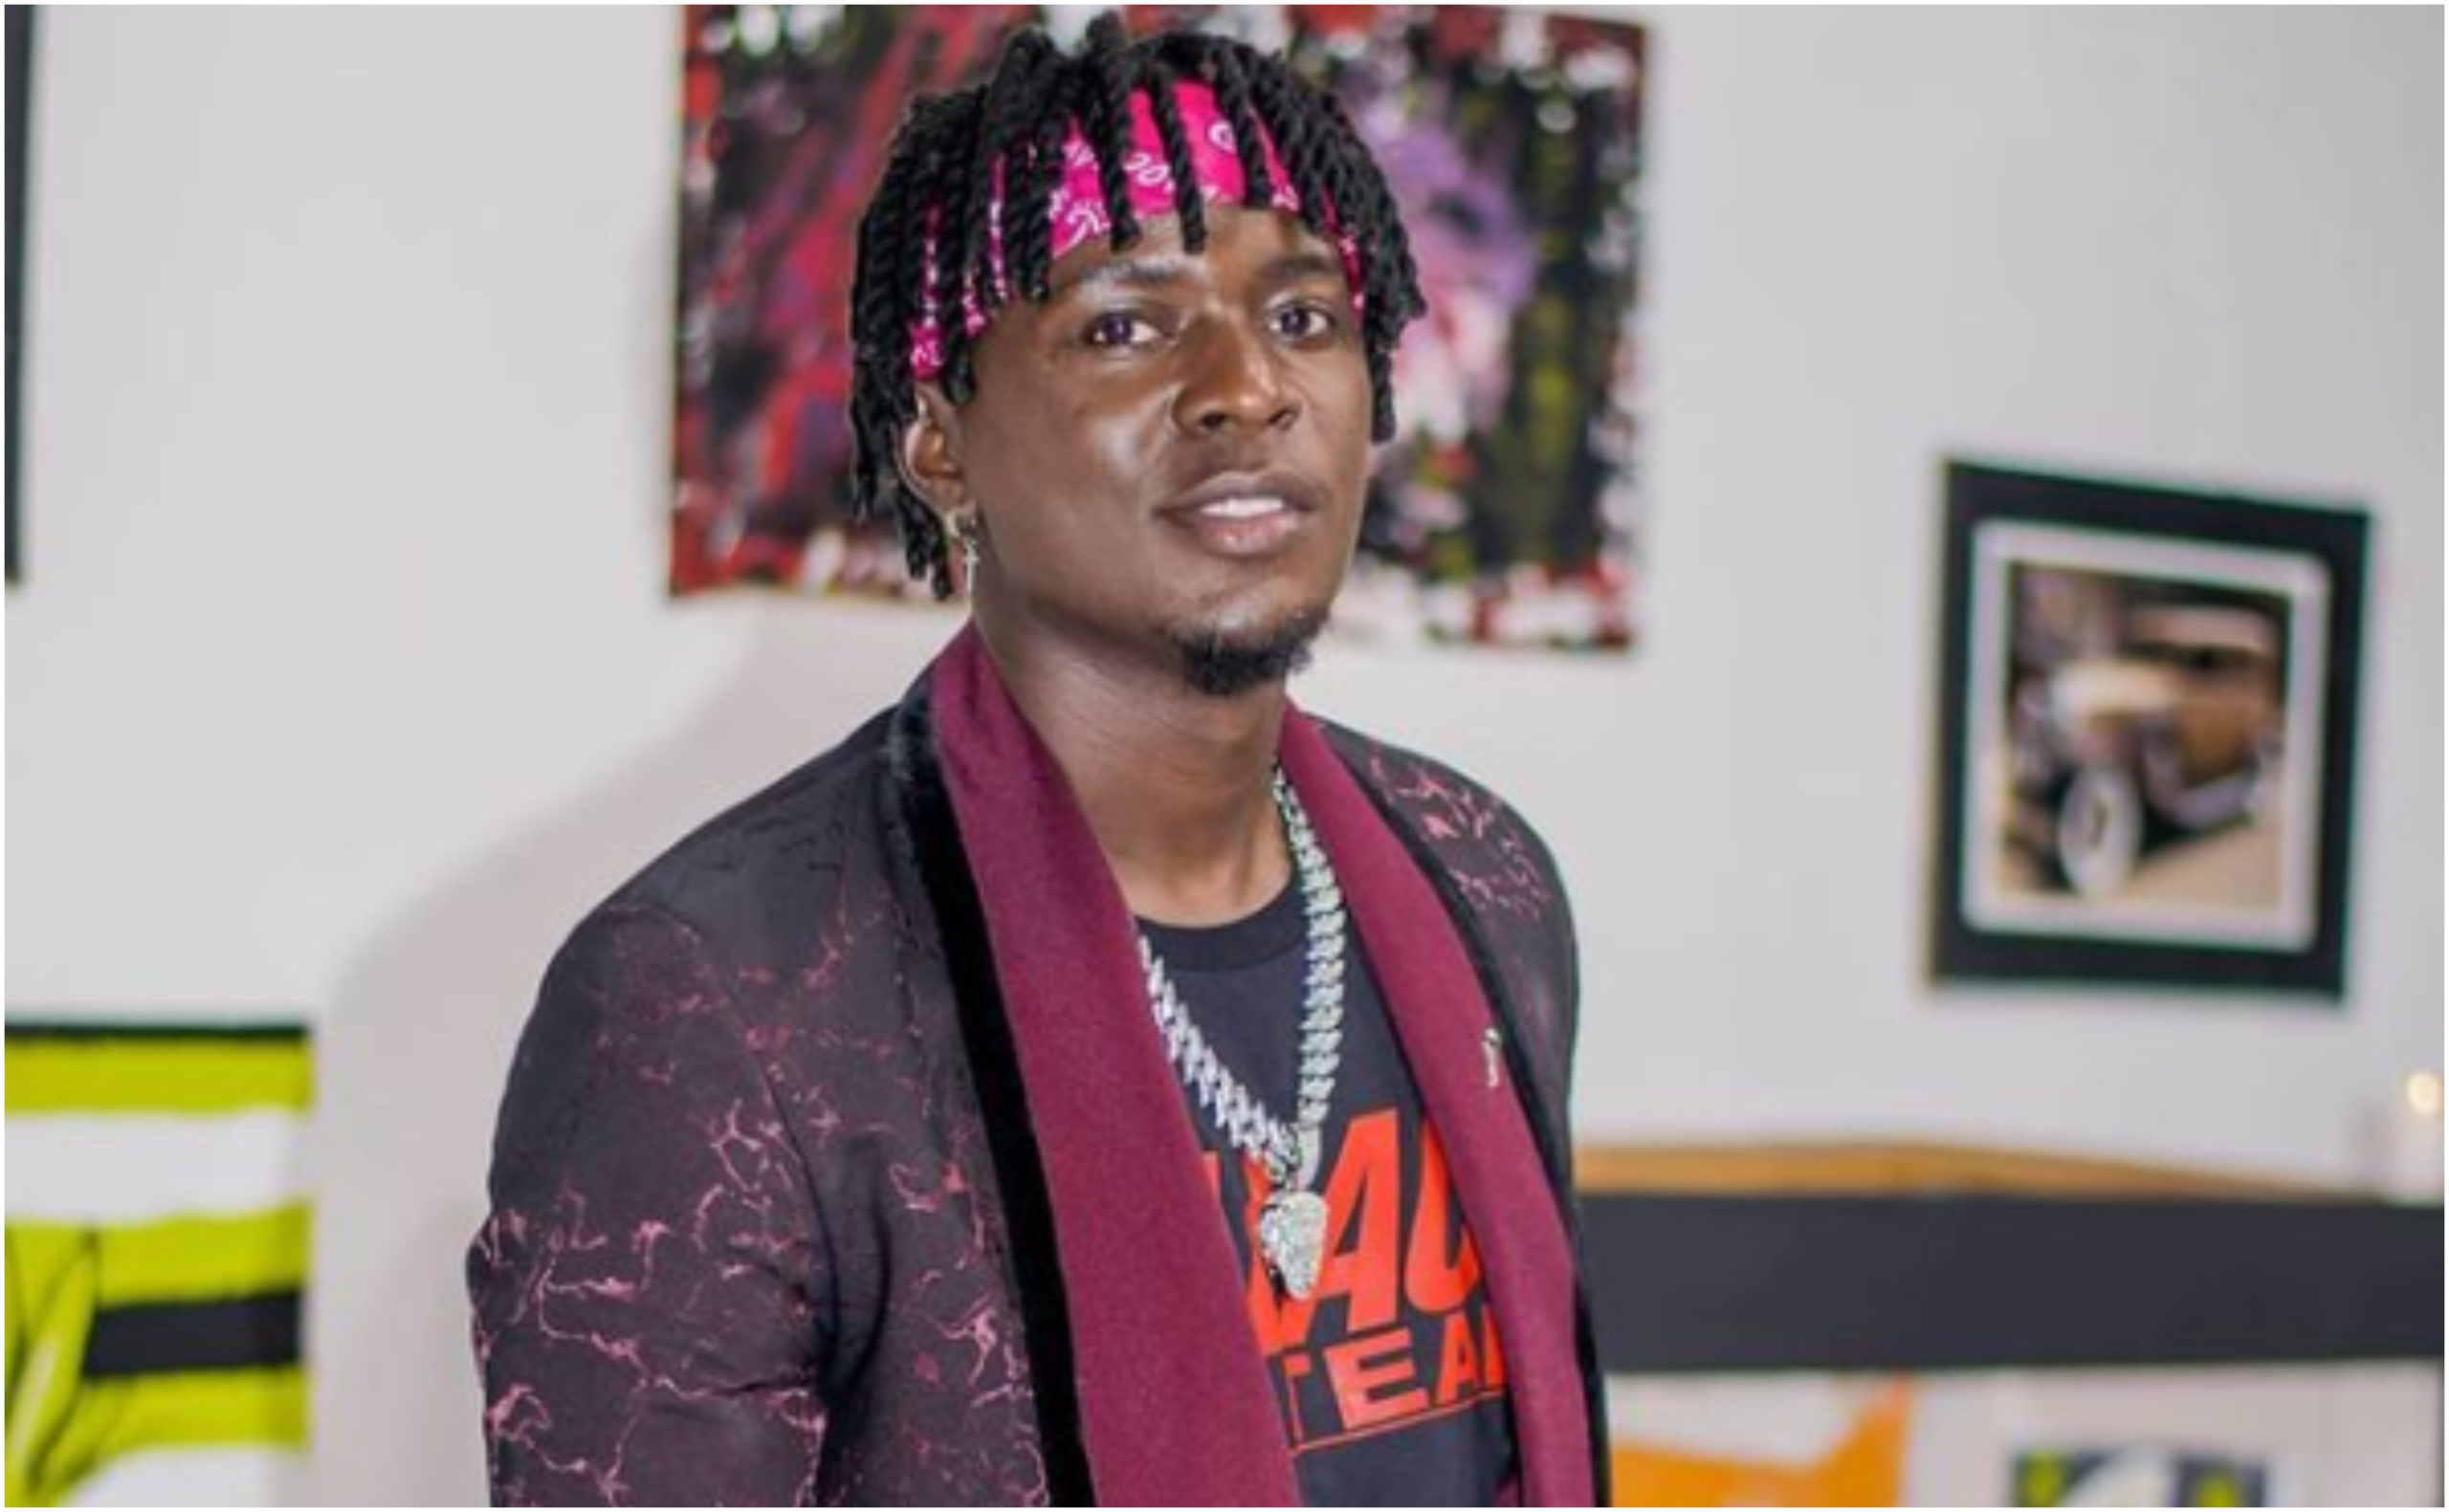 Willy Paul is cheapening his brand with all his stunts